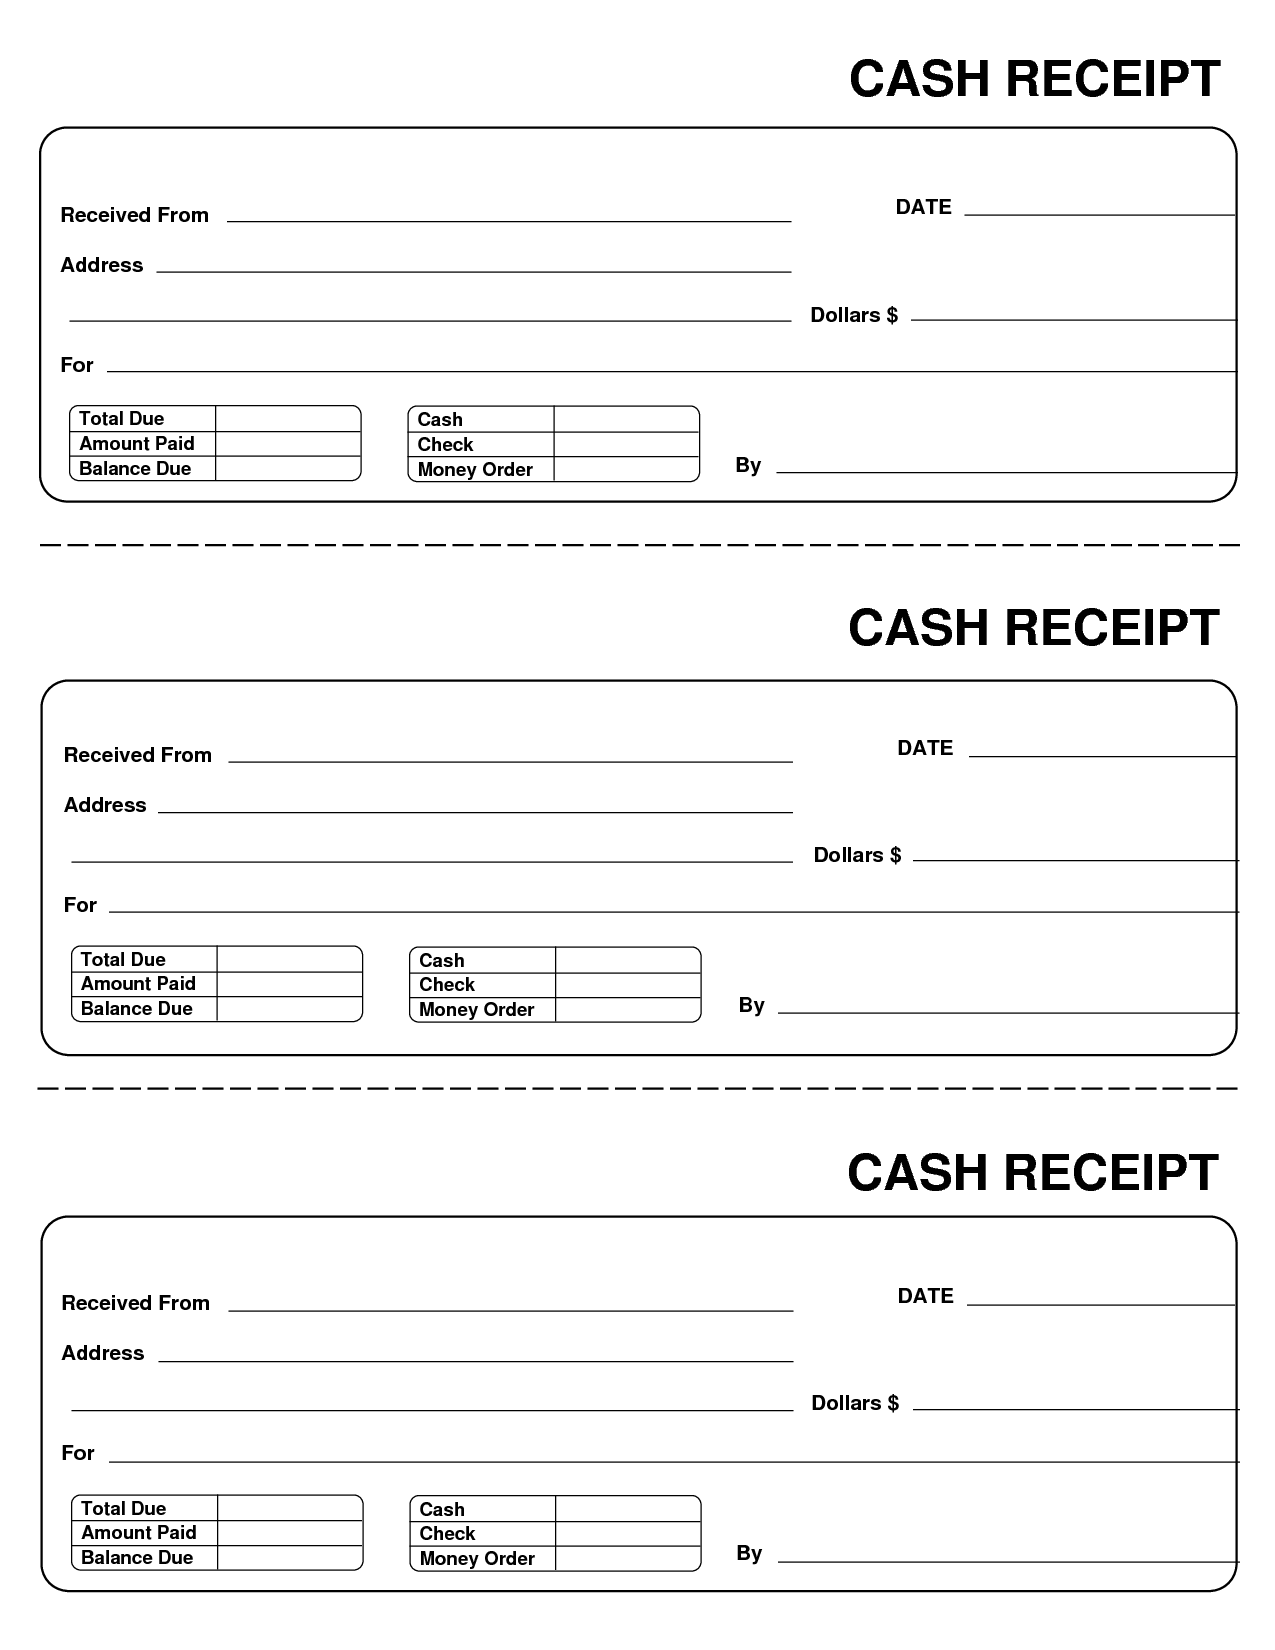 Sample Printable Receipt Form 10+ Free Documents in PDF